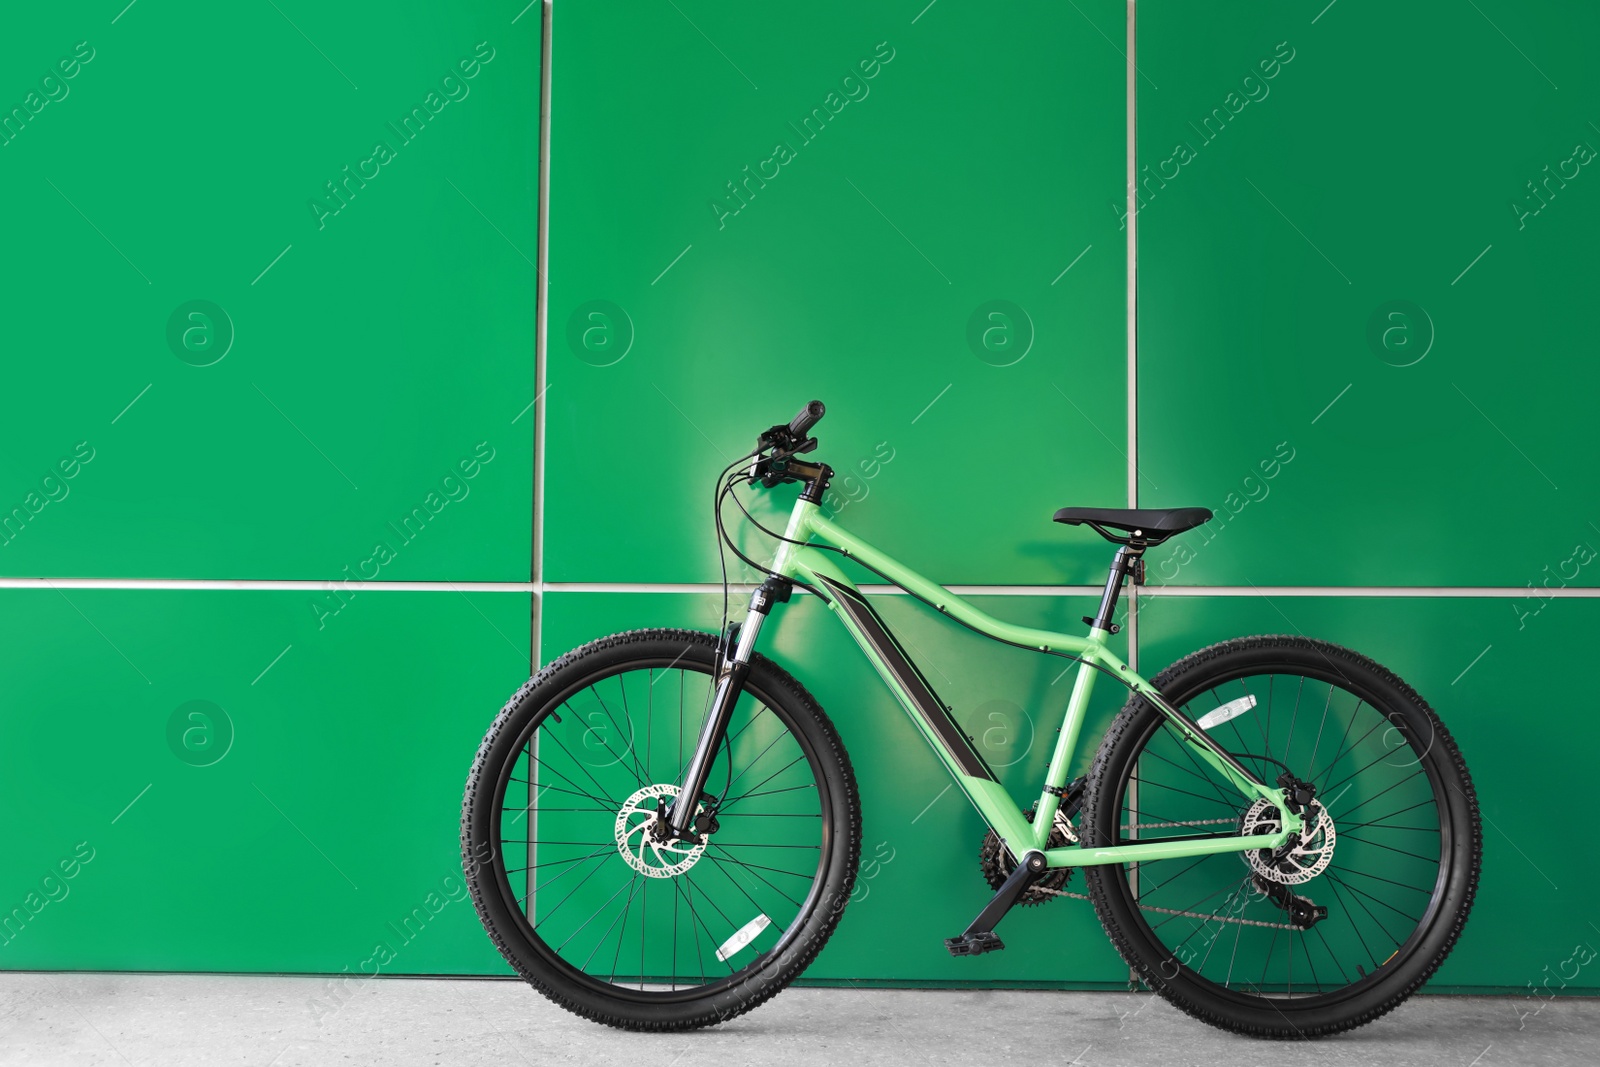 Photo of New modern color bicycle near green wall outdoors